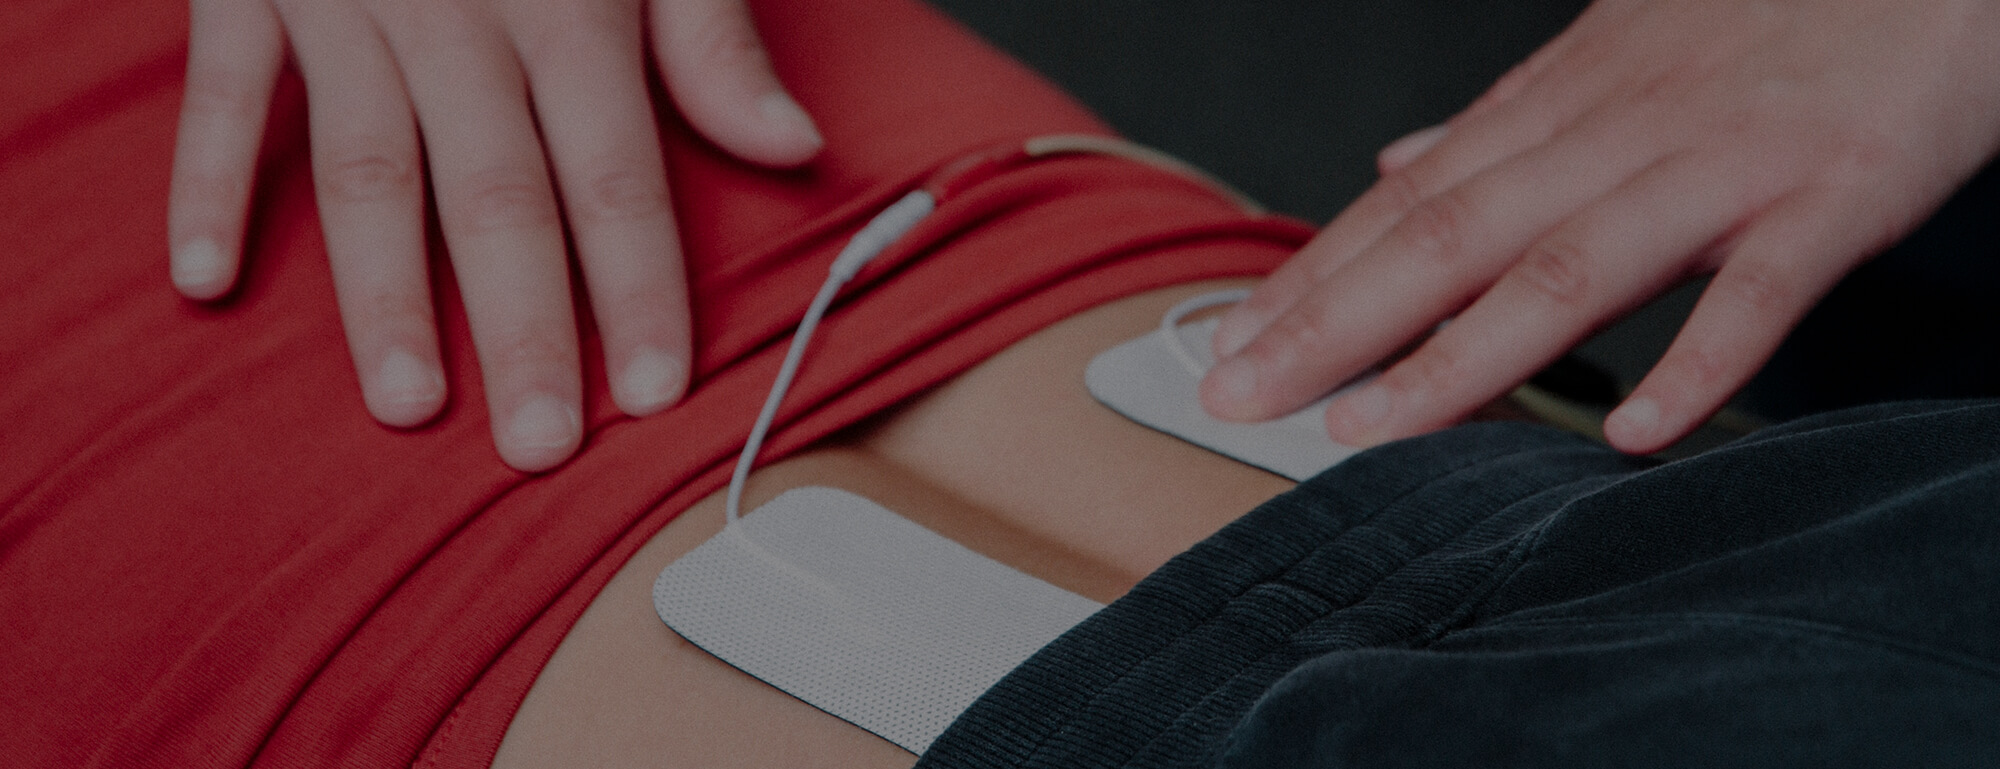 Day Chiropractic staff administering electrical muscle stimulation on the lower back of a patient.